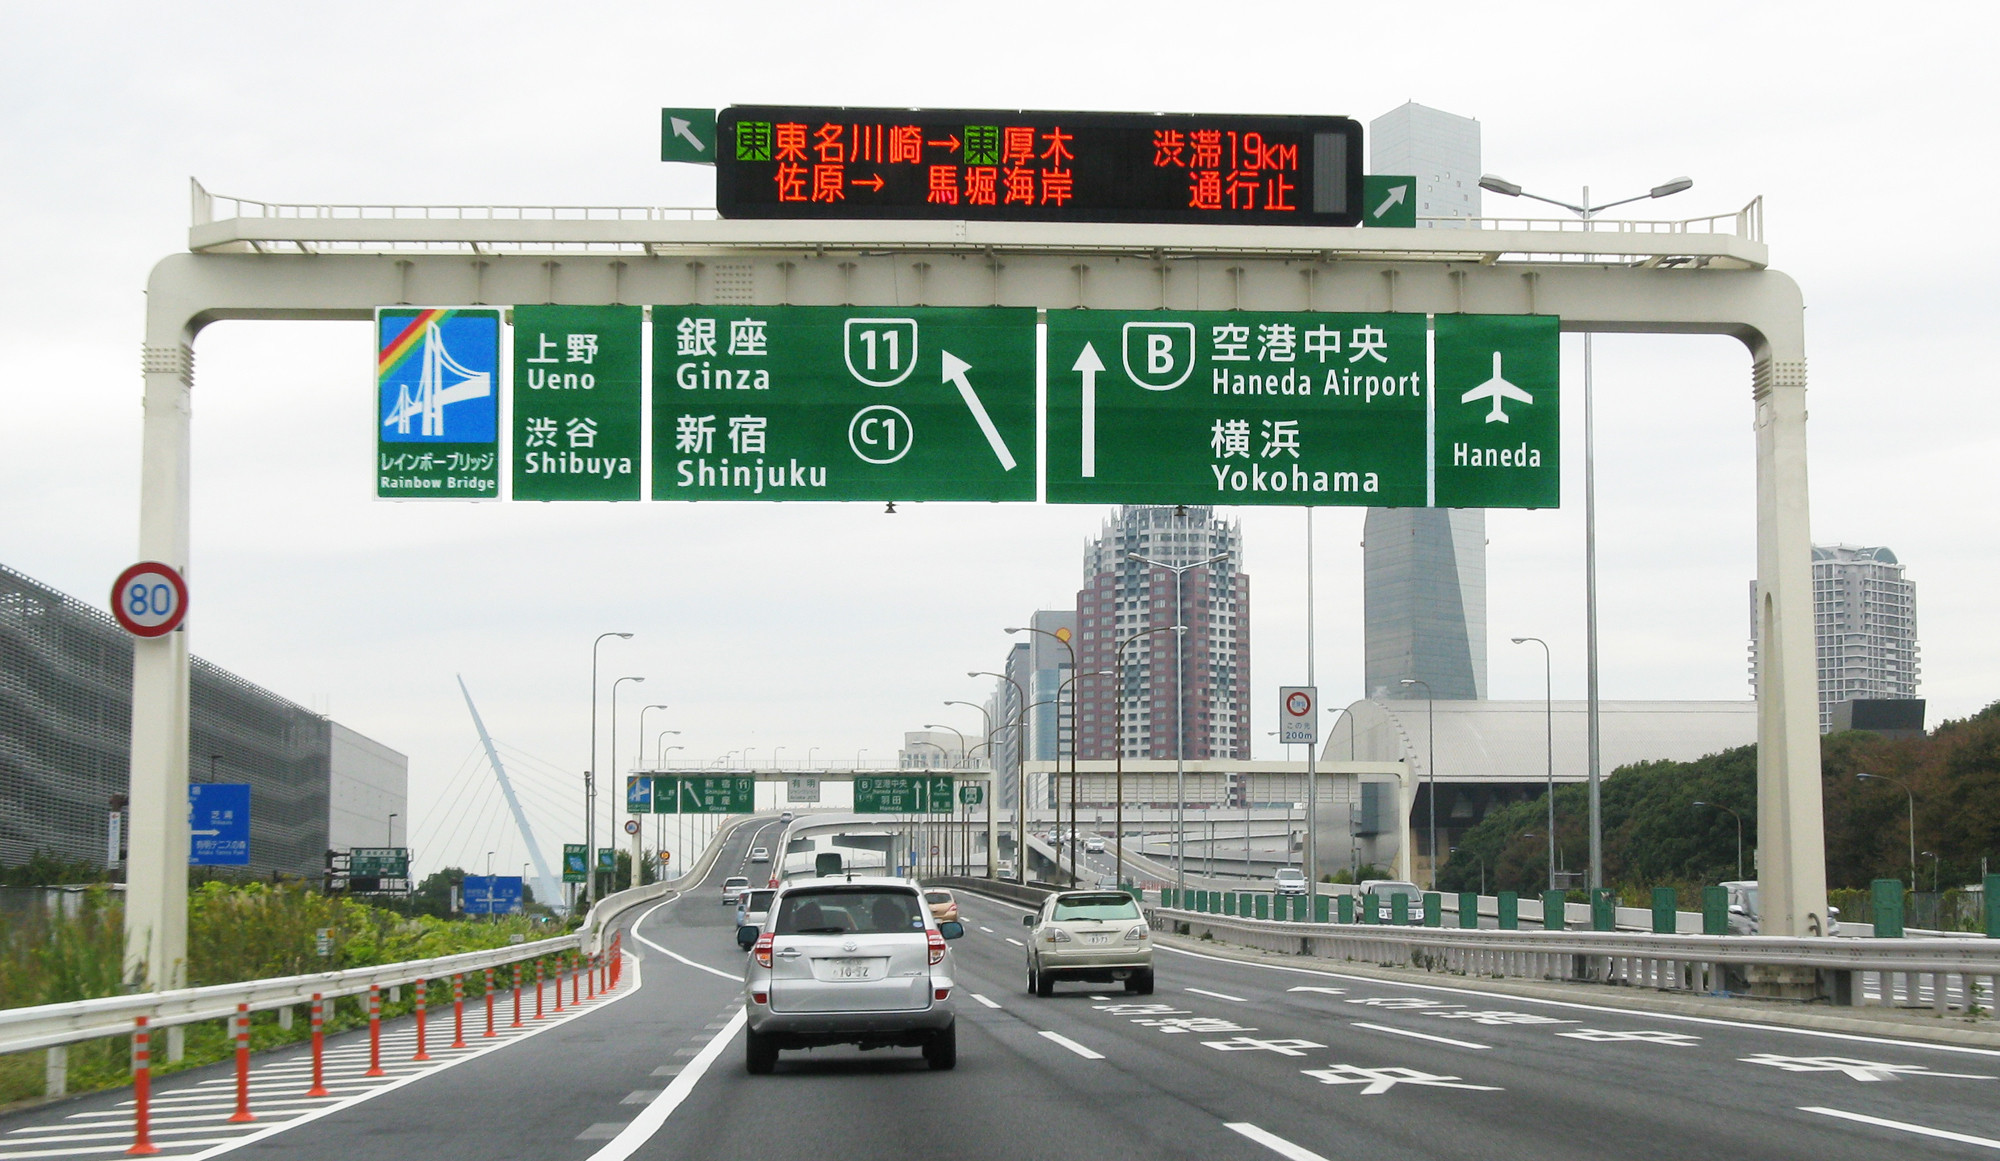 Traffic tolls to be increased to try to help ease congestion during Tokyo 2020